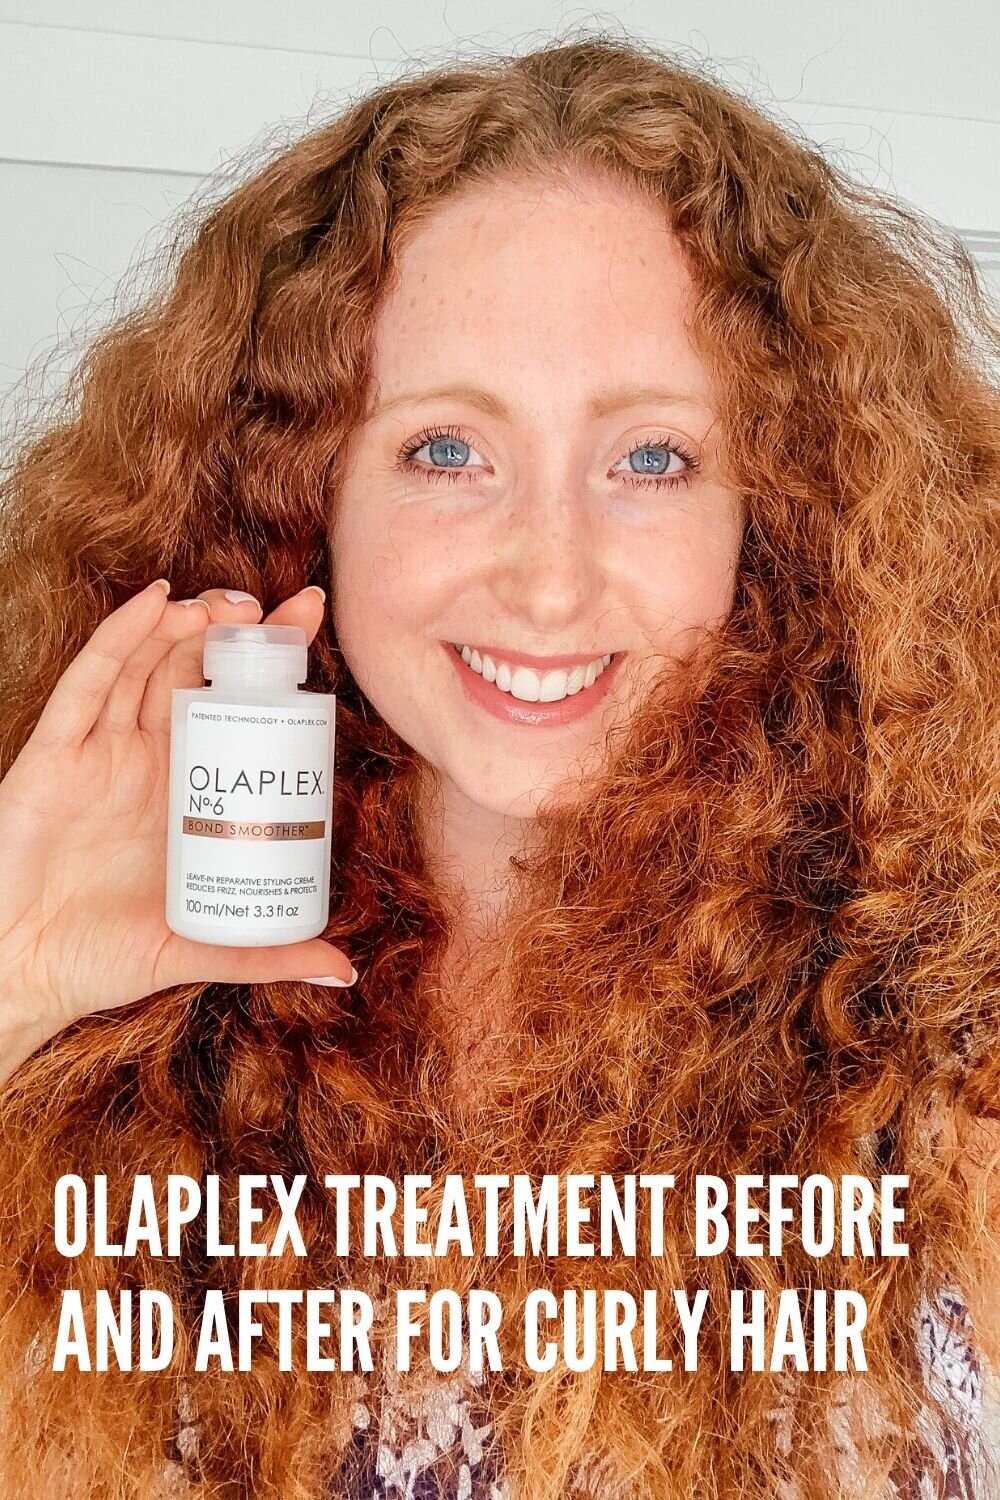 I’ve included Olaplex 3 before and after pictures as well as Olaplex 6 before and after pictures.  Find out if Olaplex is worth it in this detailed Olaplex review.